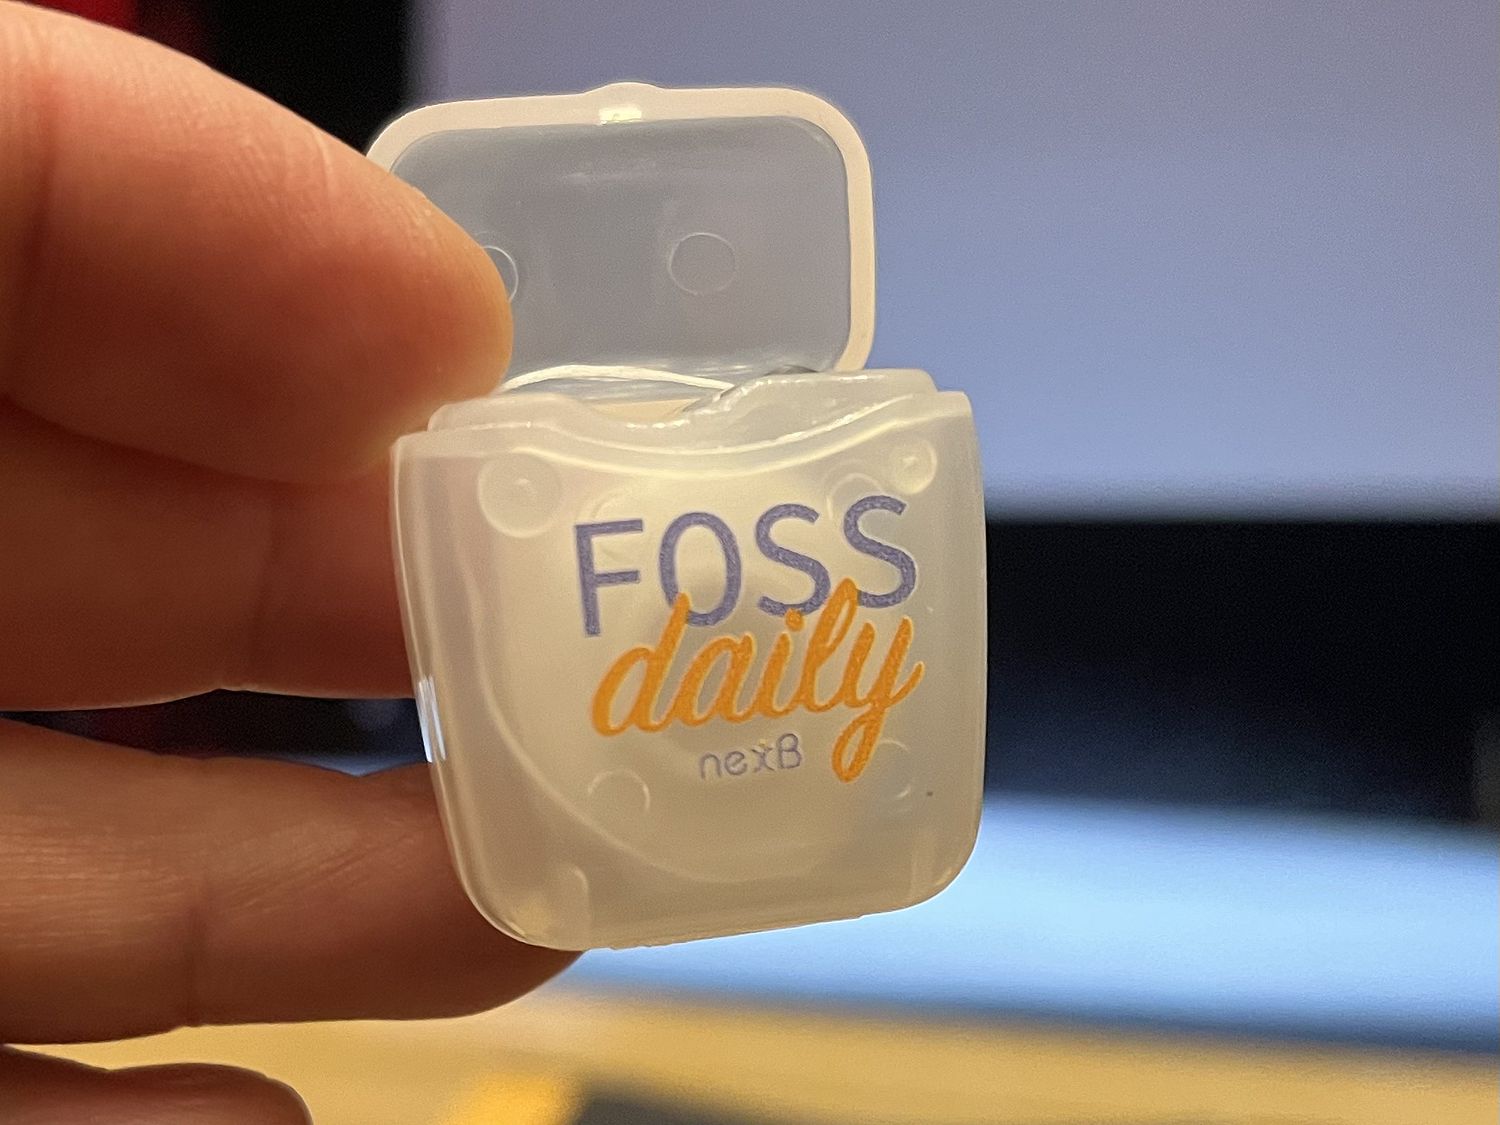 Small dental floss container with the text "FOSS daily".